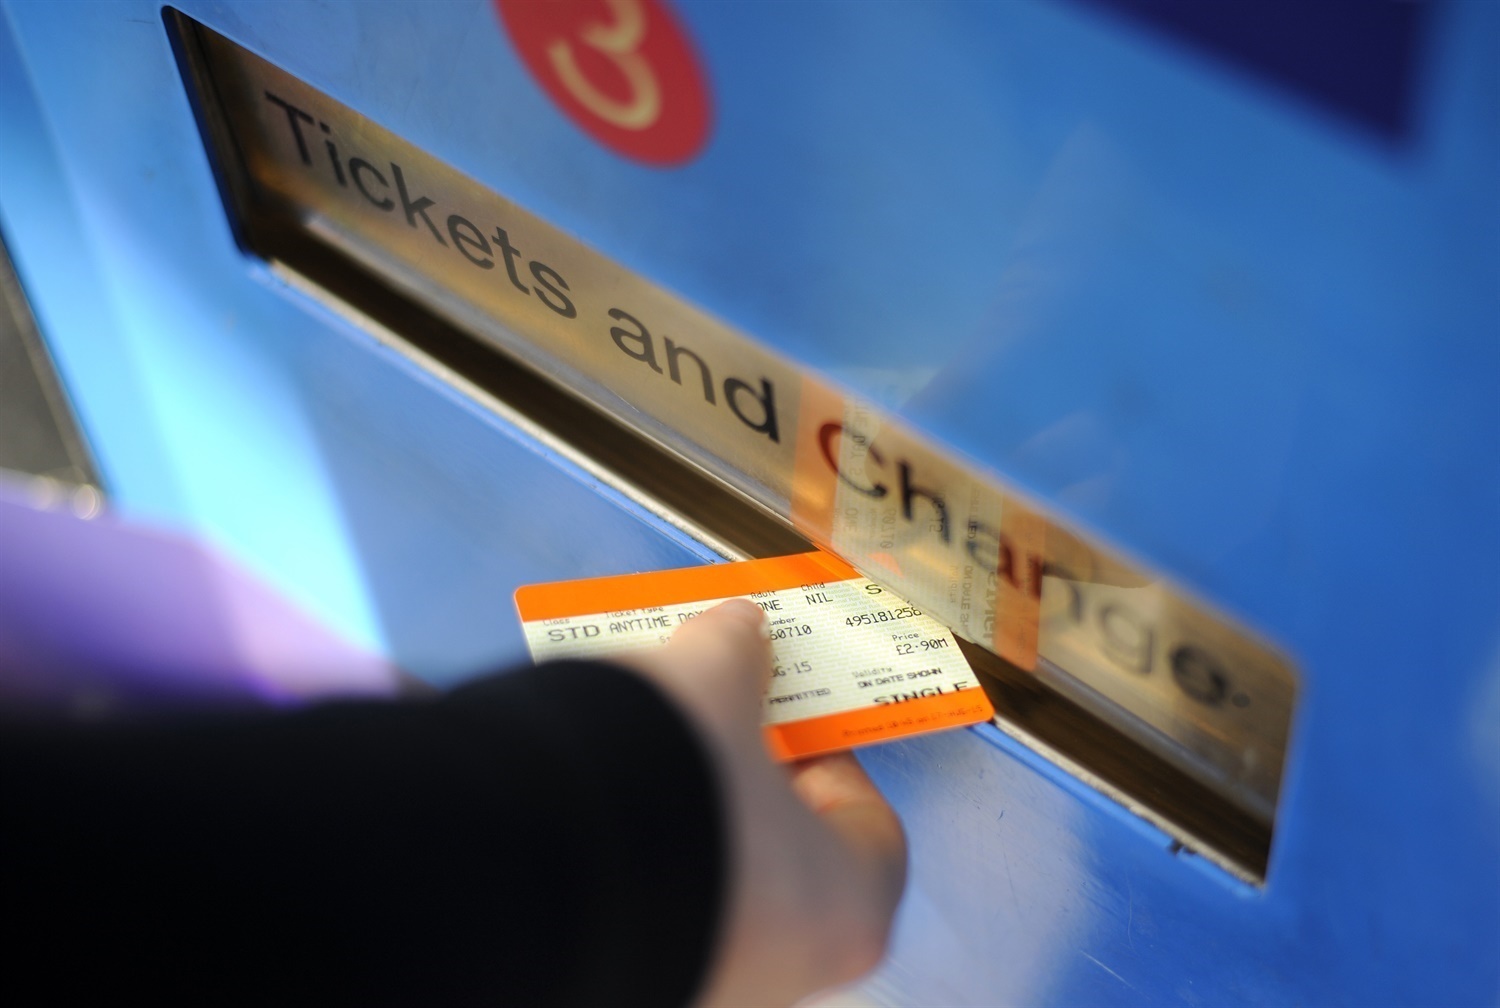 Rail industry to seek national ideas for ‘root and branch’ fares reform in June